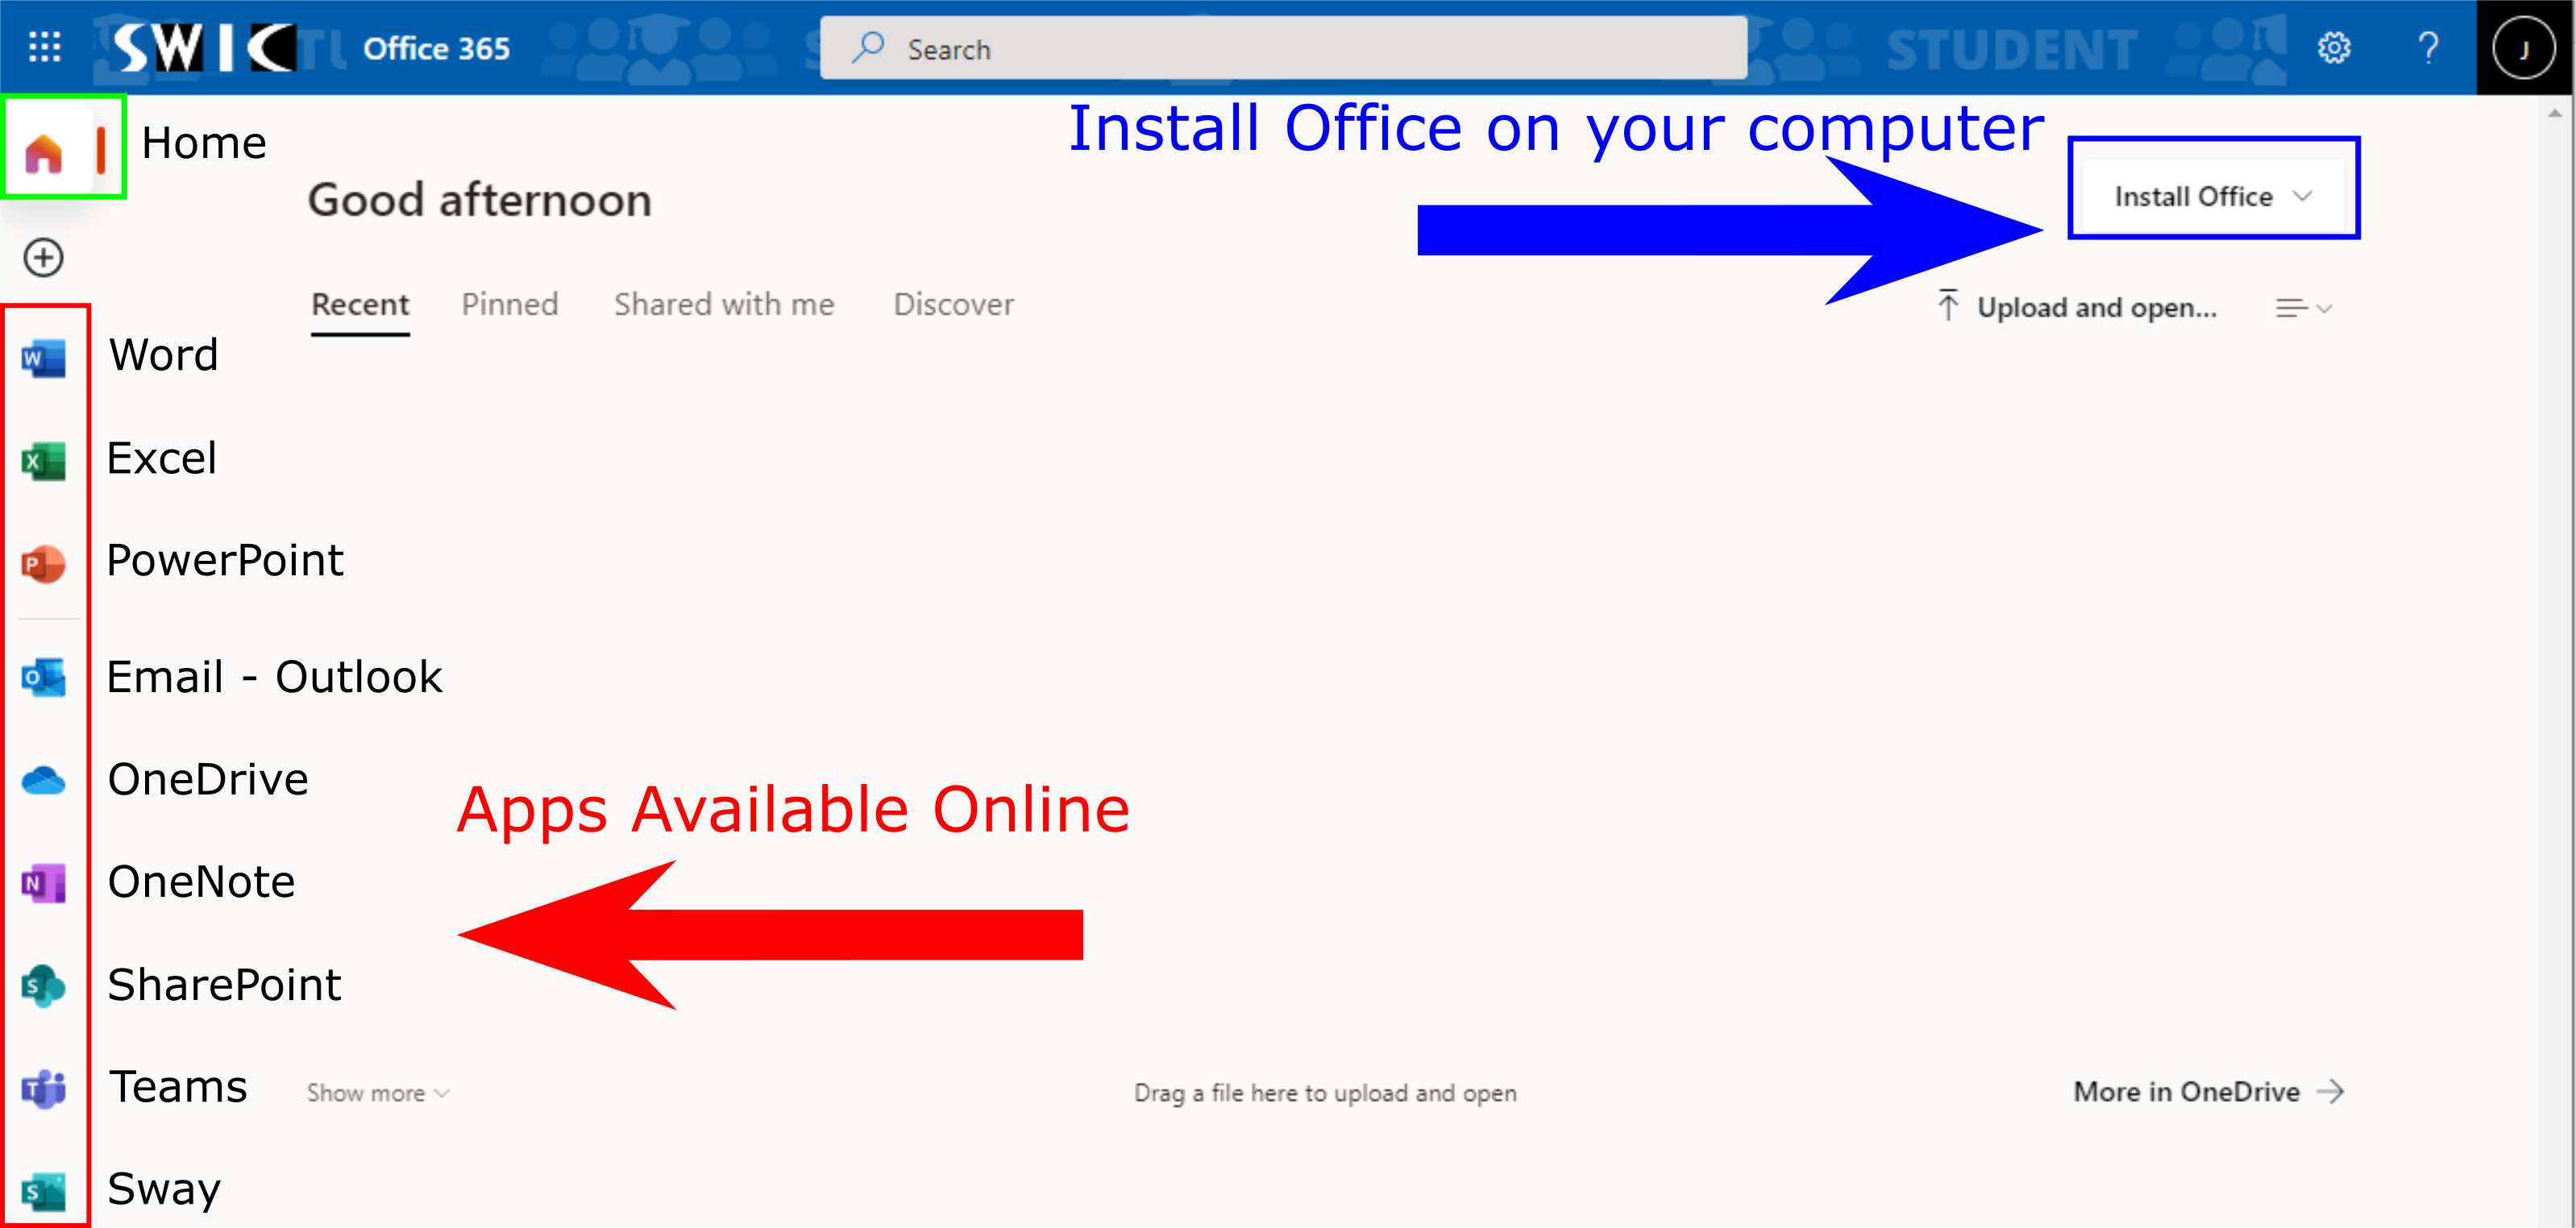 microsoft office student download